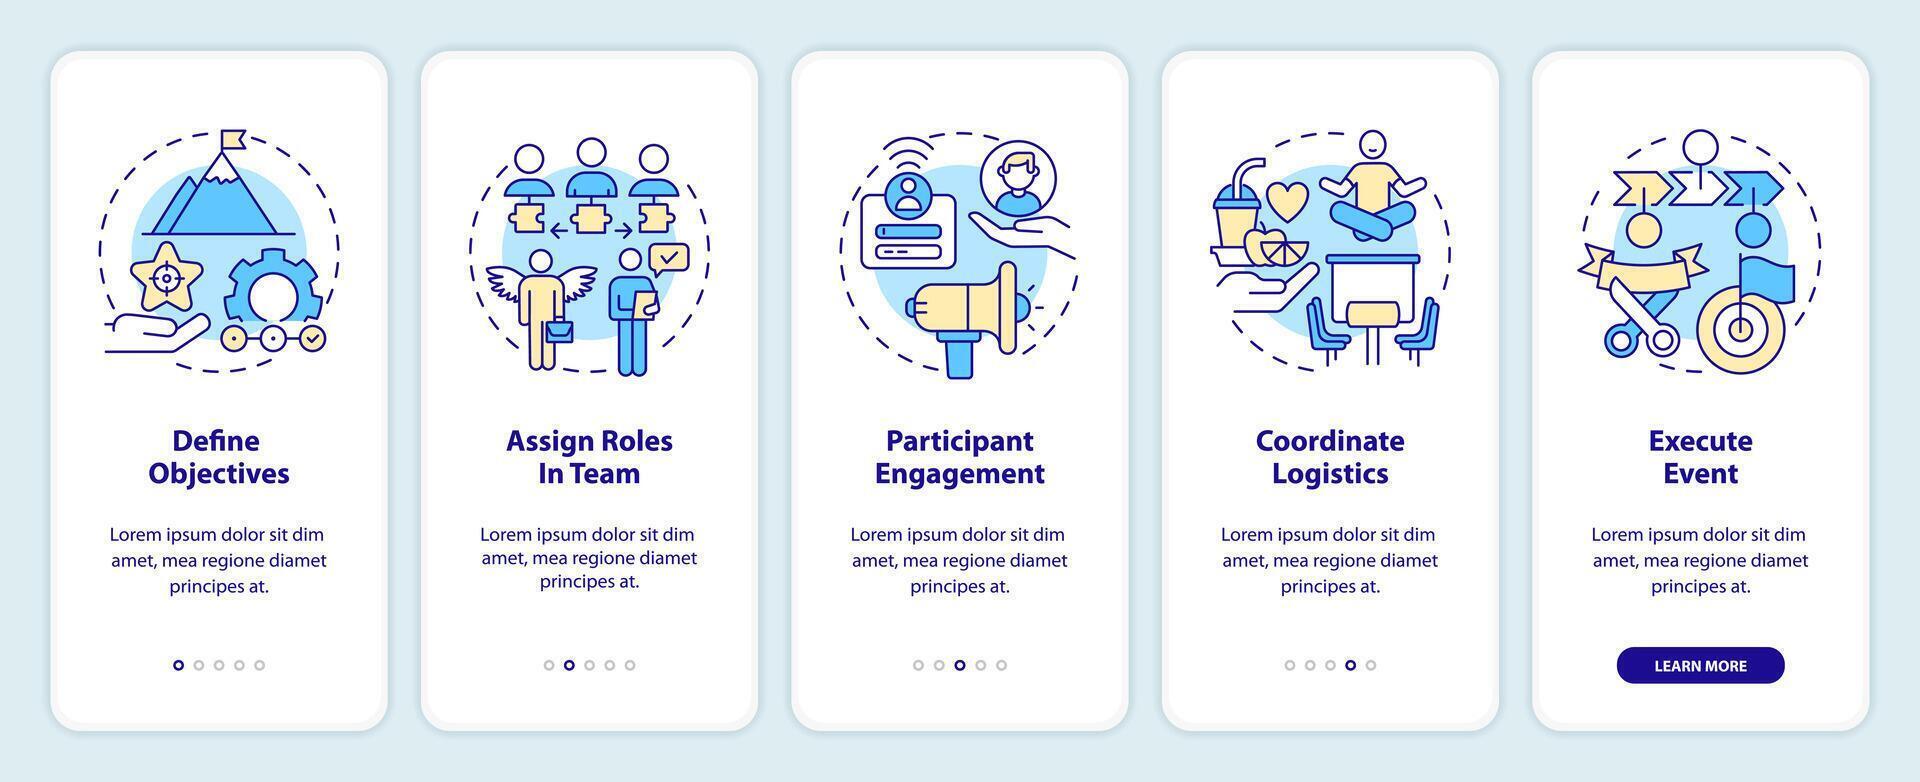 How to organize hackathon onboarding mobile app screen. Walkthrough 5 steps editable graphic instructions with linear concepts. UI, UX, GUI template vector